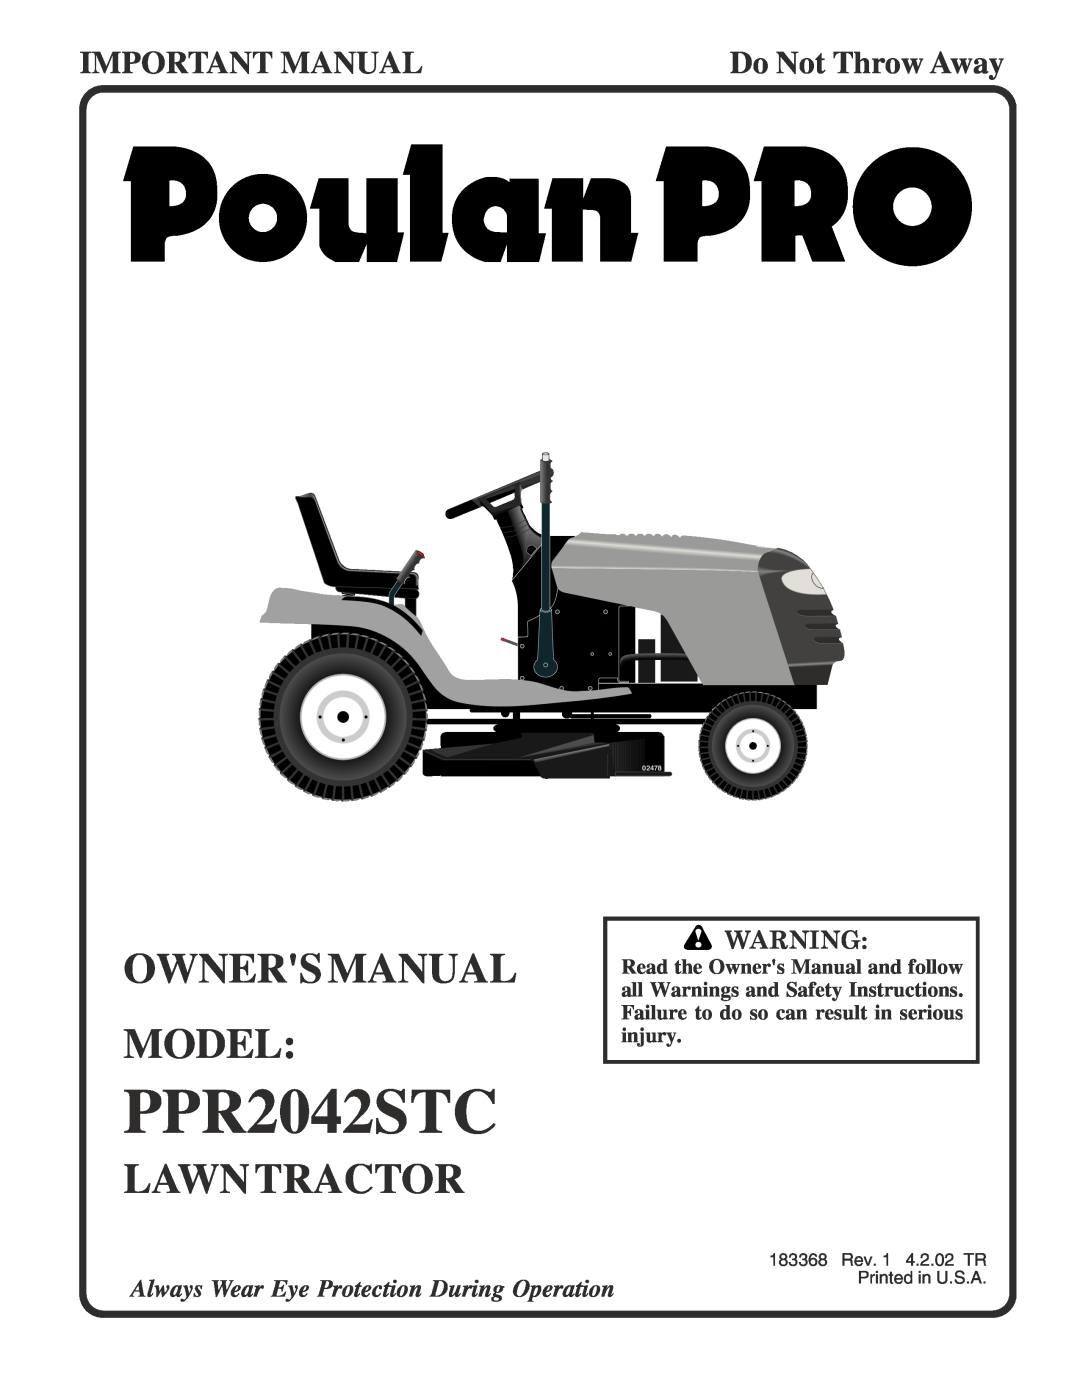 Poulan 183368 owner manual PPR2042STC, Owners Manual Model, Lawntractor, Important Manual, Do Not Throw Away, 02478 